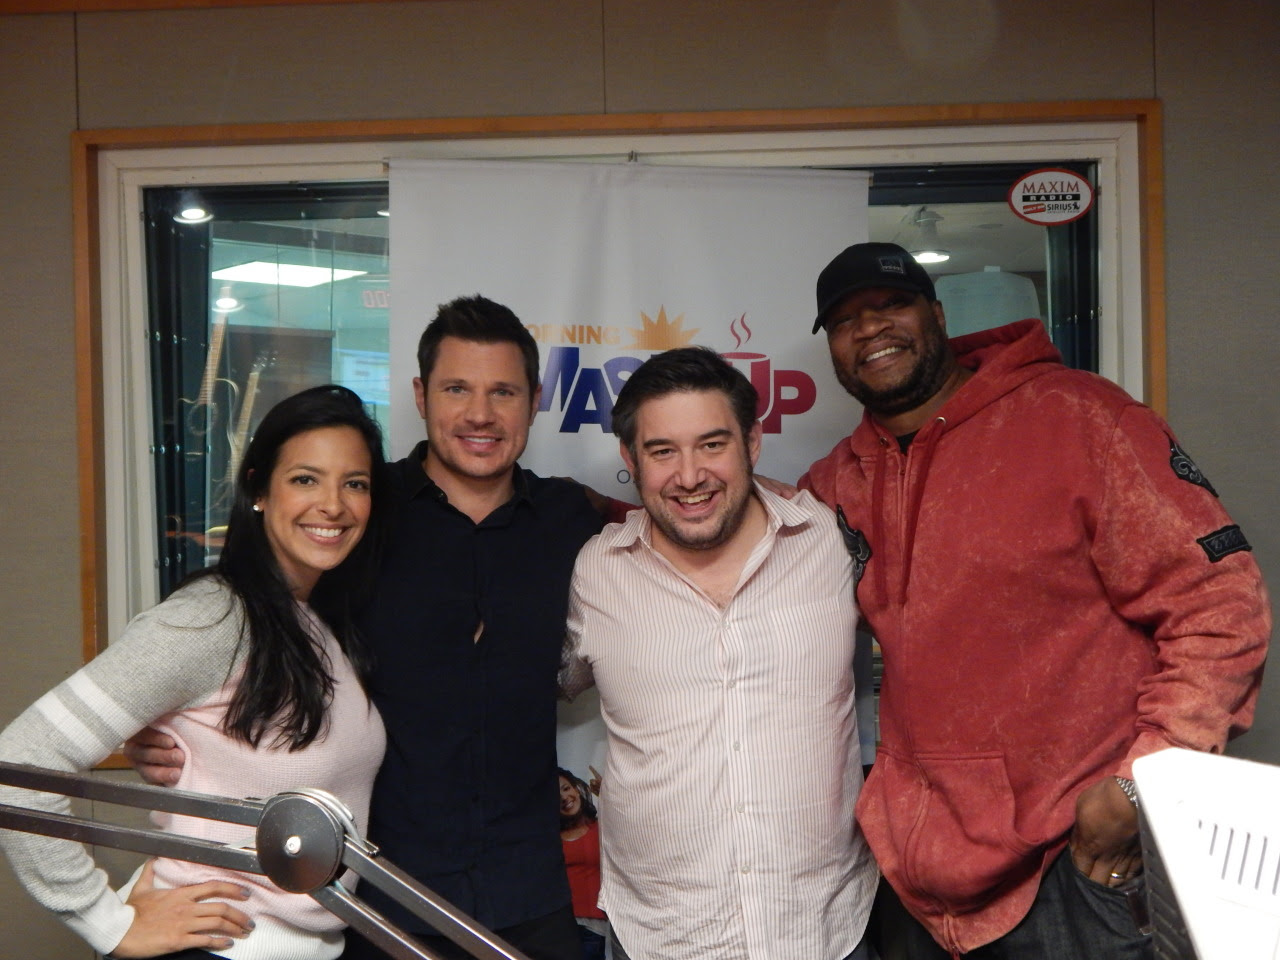 Nick Lachey is such a good guy, really fun to talk to, and our bud. Always a pleasure having him in studio!

Nick tells us about going to Disney for his & Vanessa’s birthdays, whether Camden is ready to be a big brother, and his new album, Soundtrack Of My Life. Plus, we find out he & Stanley have something in common - car service!
http://hits1.co/1A8d3D9

We get Nick’s reaction to an old school Censor This with one of his songs with 98 Degrees, his holiday plans, how he feels about his Bengals this season, and whether or not he’s into fantasy football.
http://hits1.co/1vkO1Pj